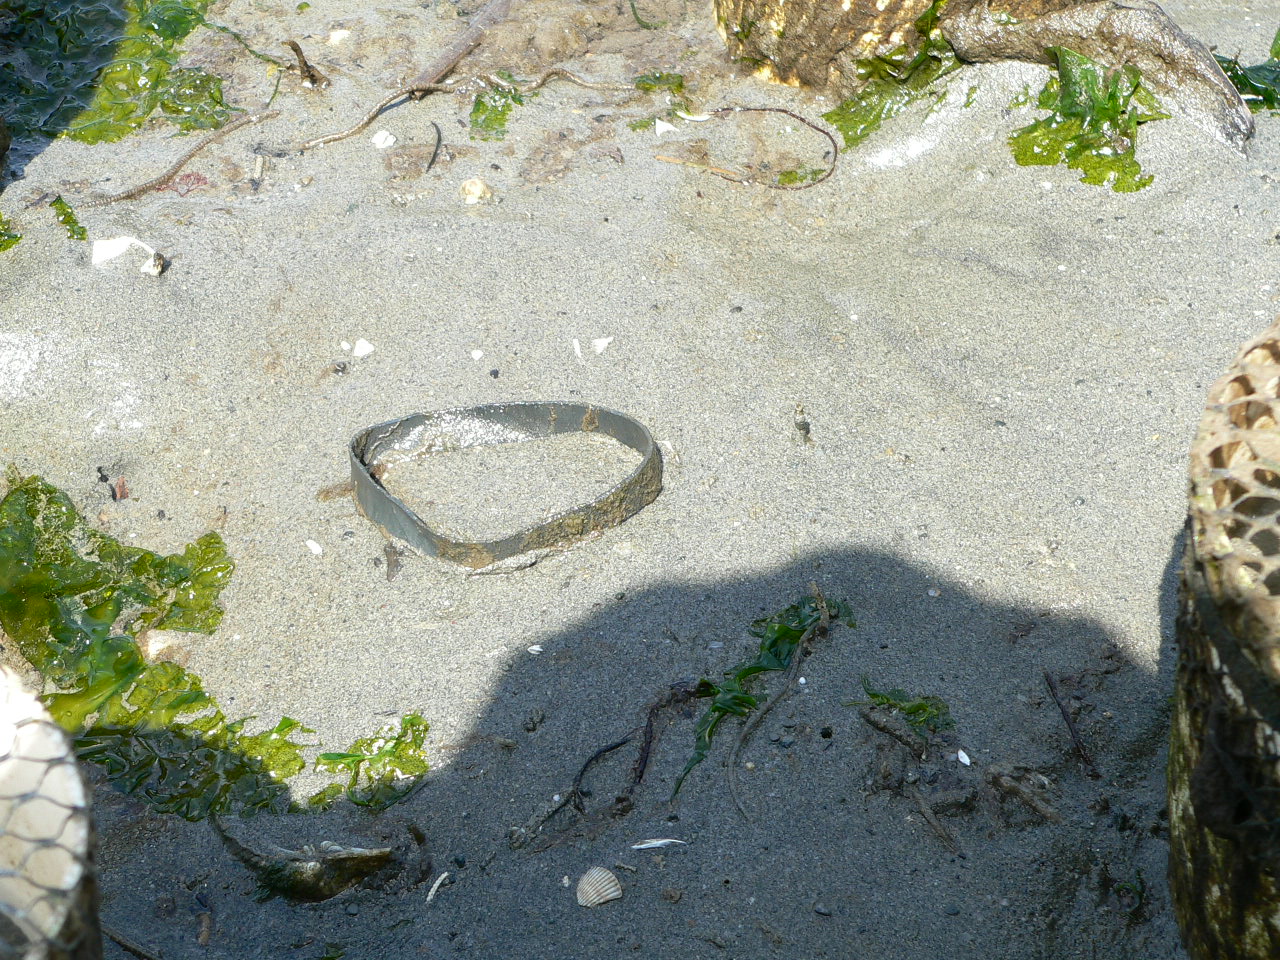 Rubber band from PVC pip from geoduck farm in Zangle Cove 2006